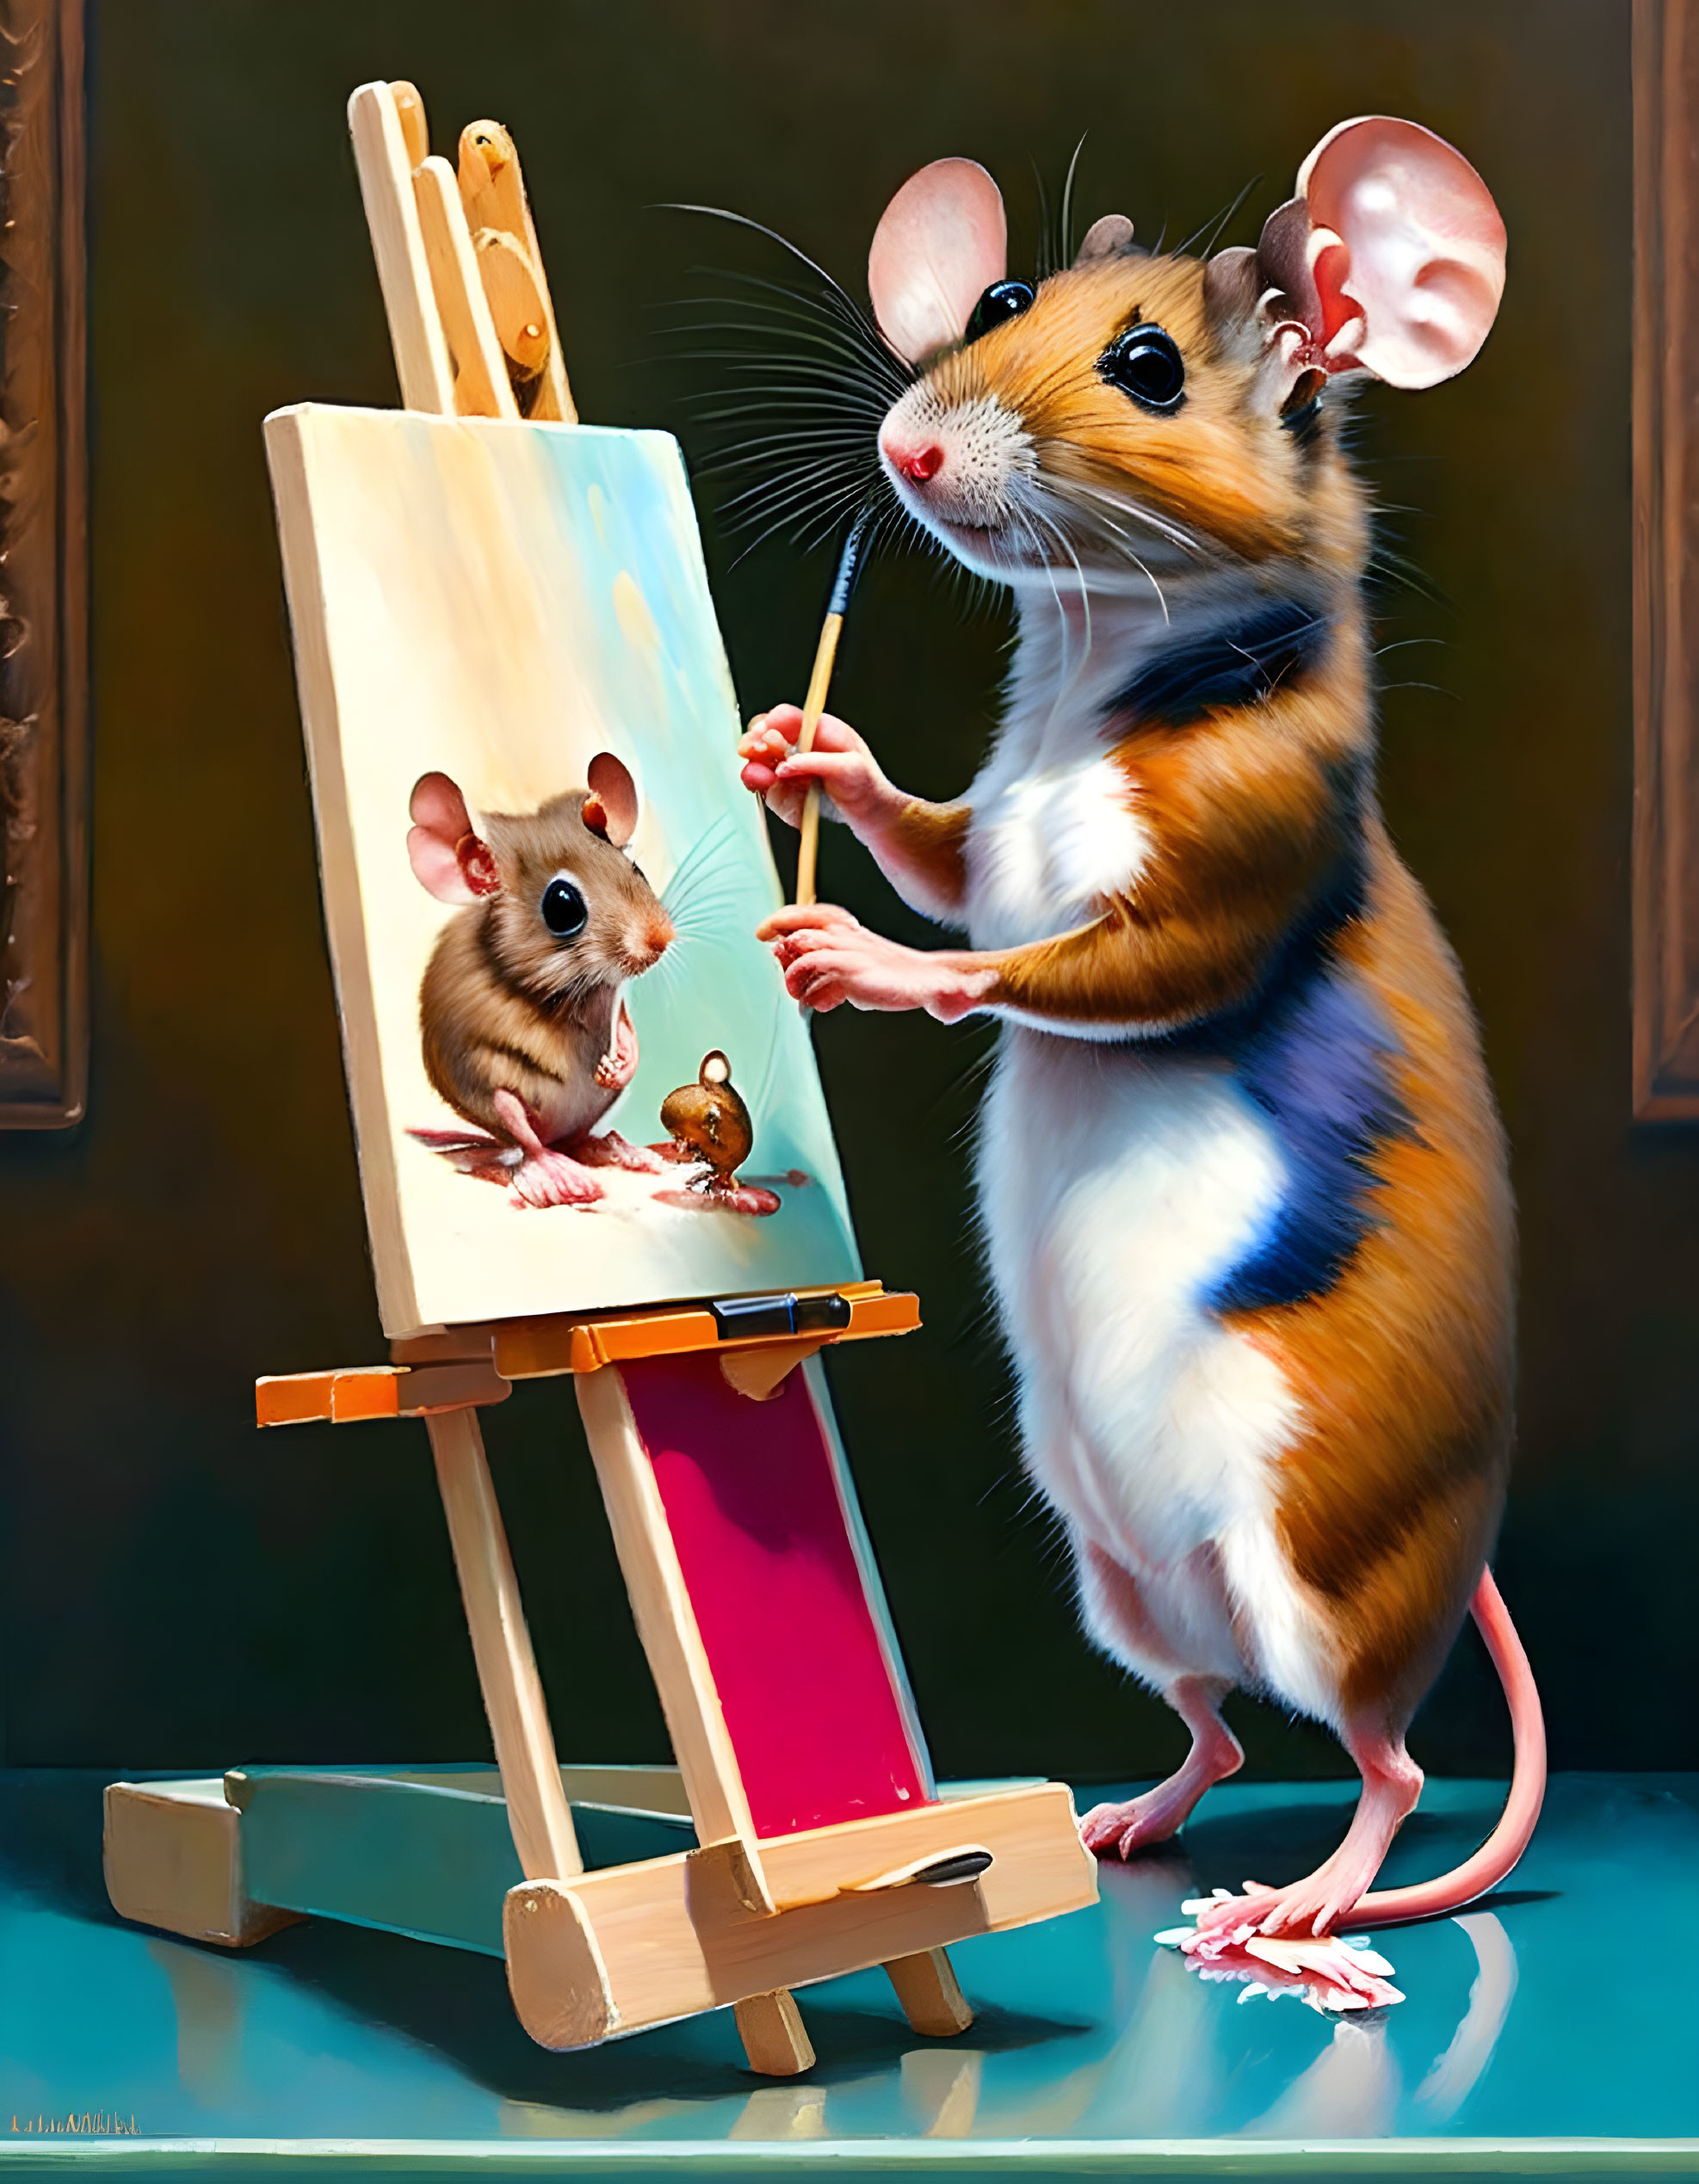 Anthropomorphic mouse painting portrait of smaller mouse on canvas in classical setting